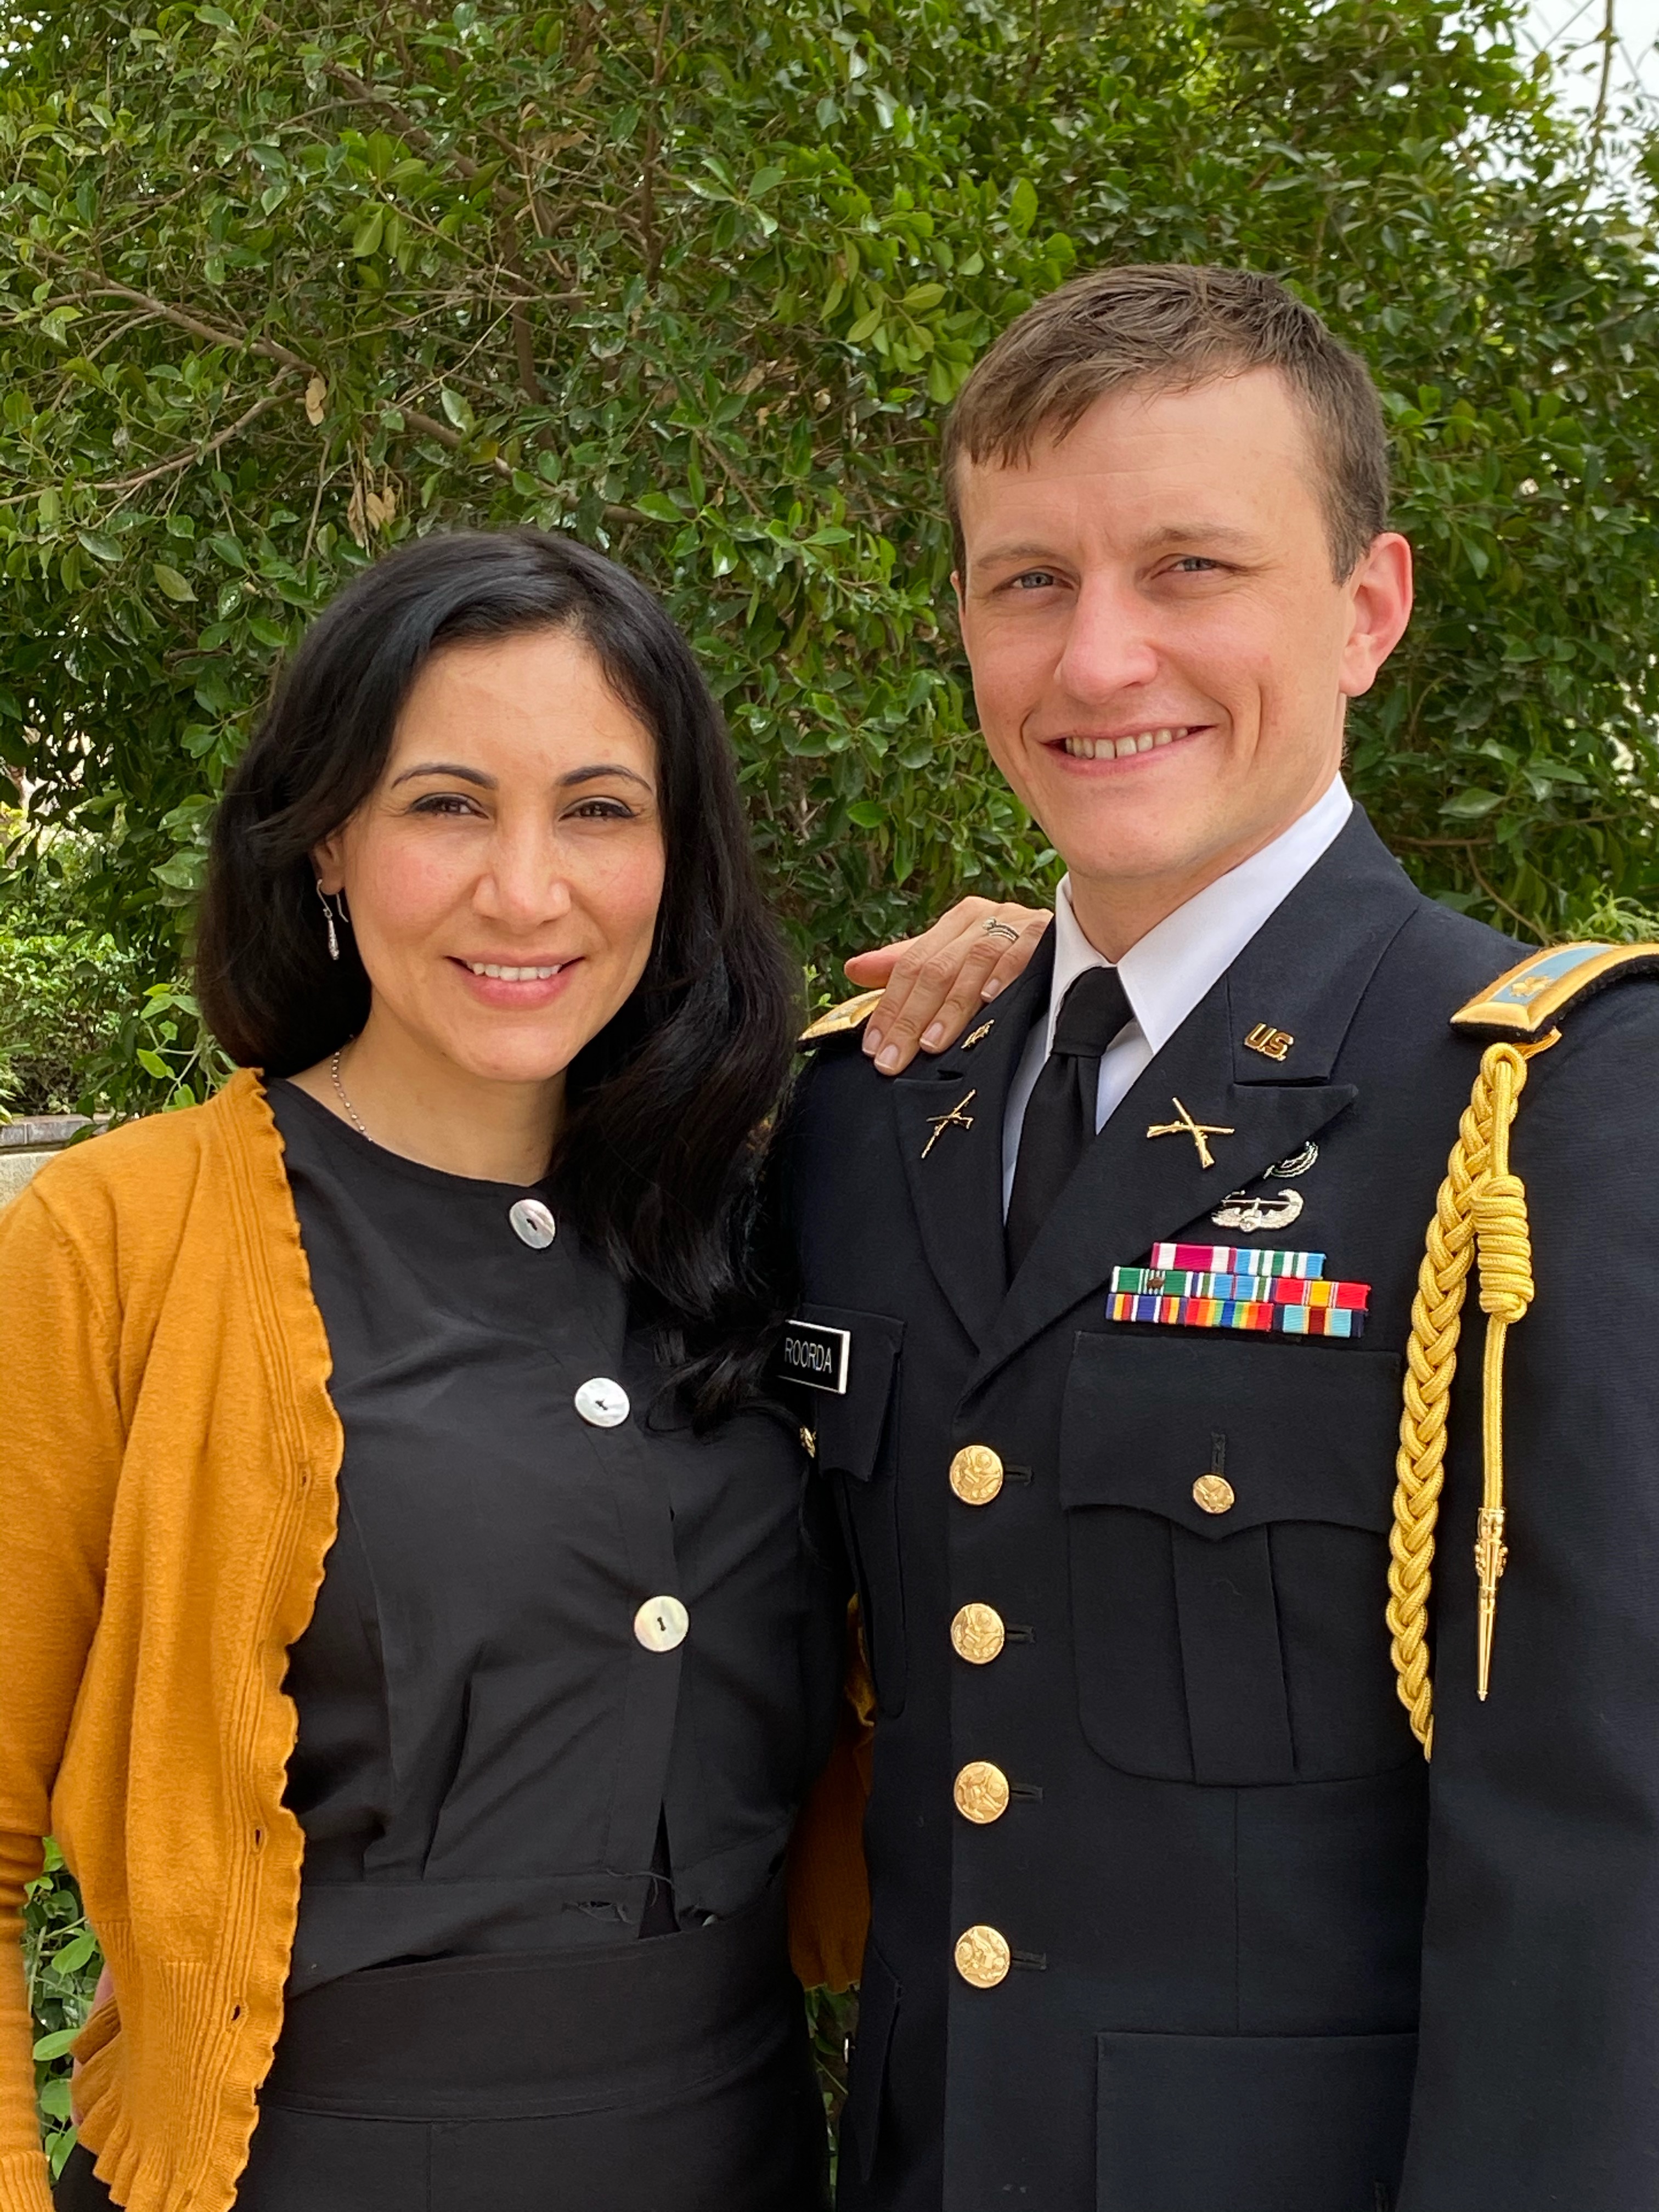 Rose R. stands with her husband, Major Brennan R., at his promotion ceremony.